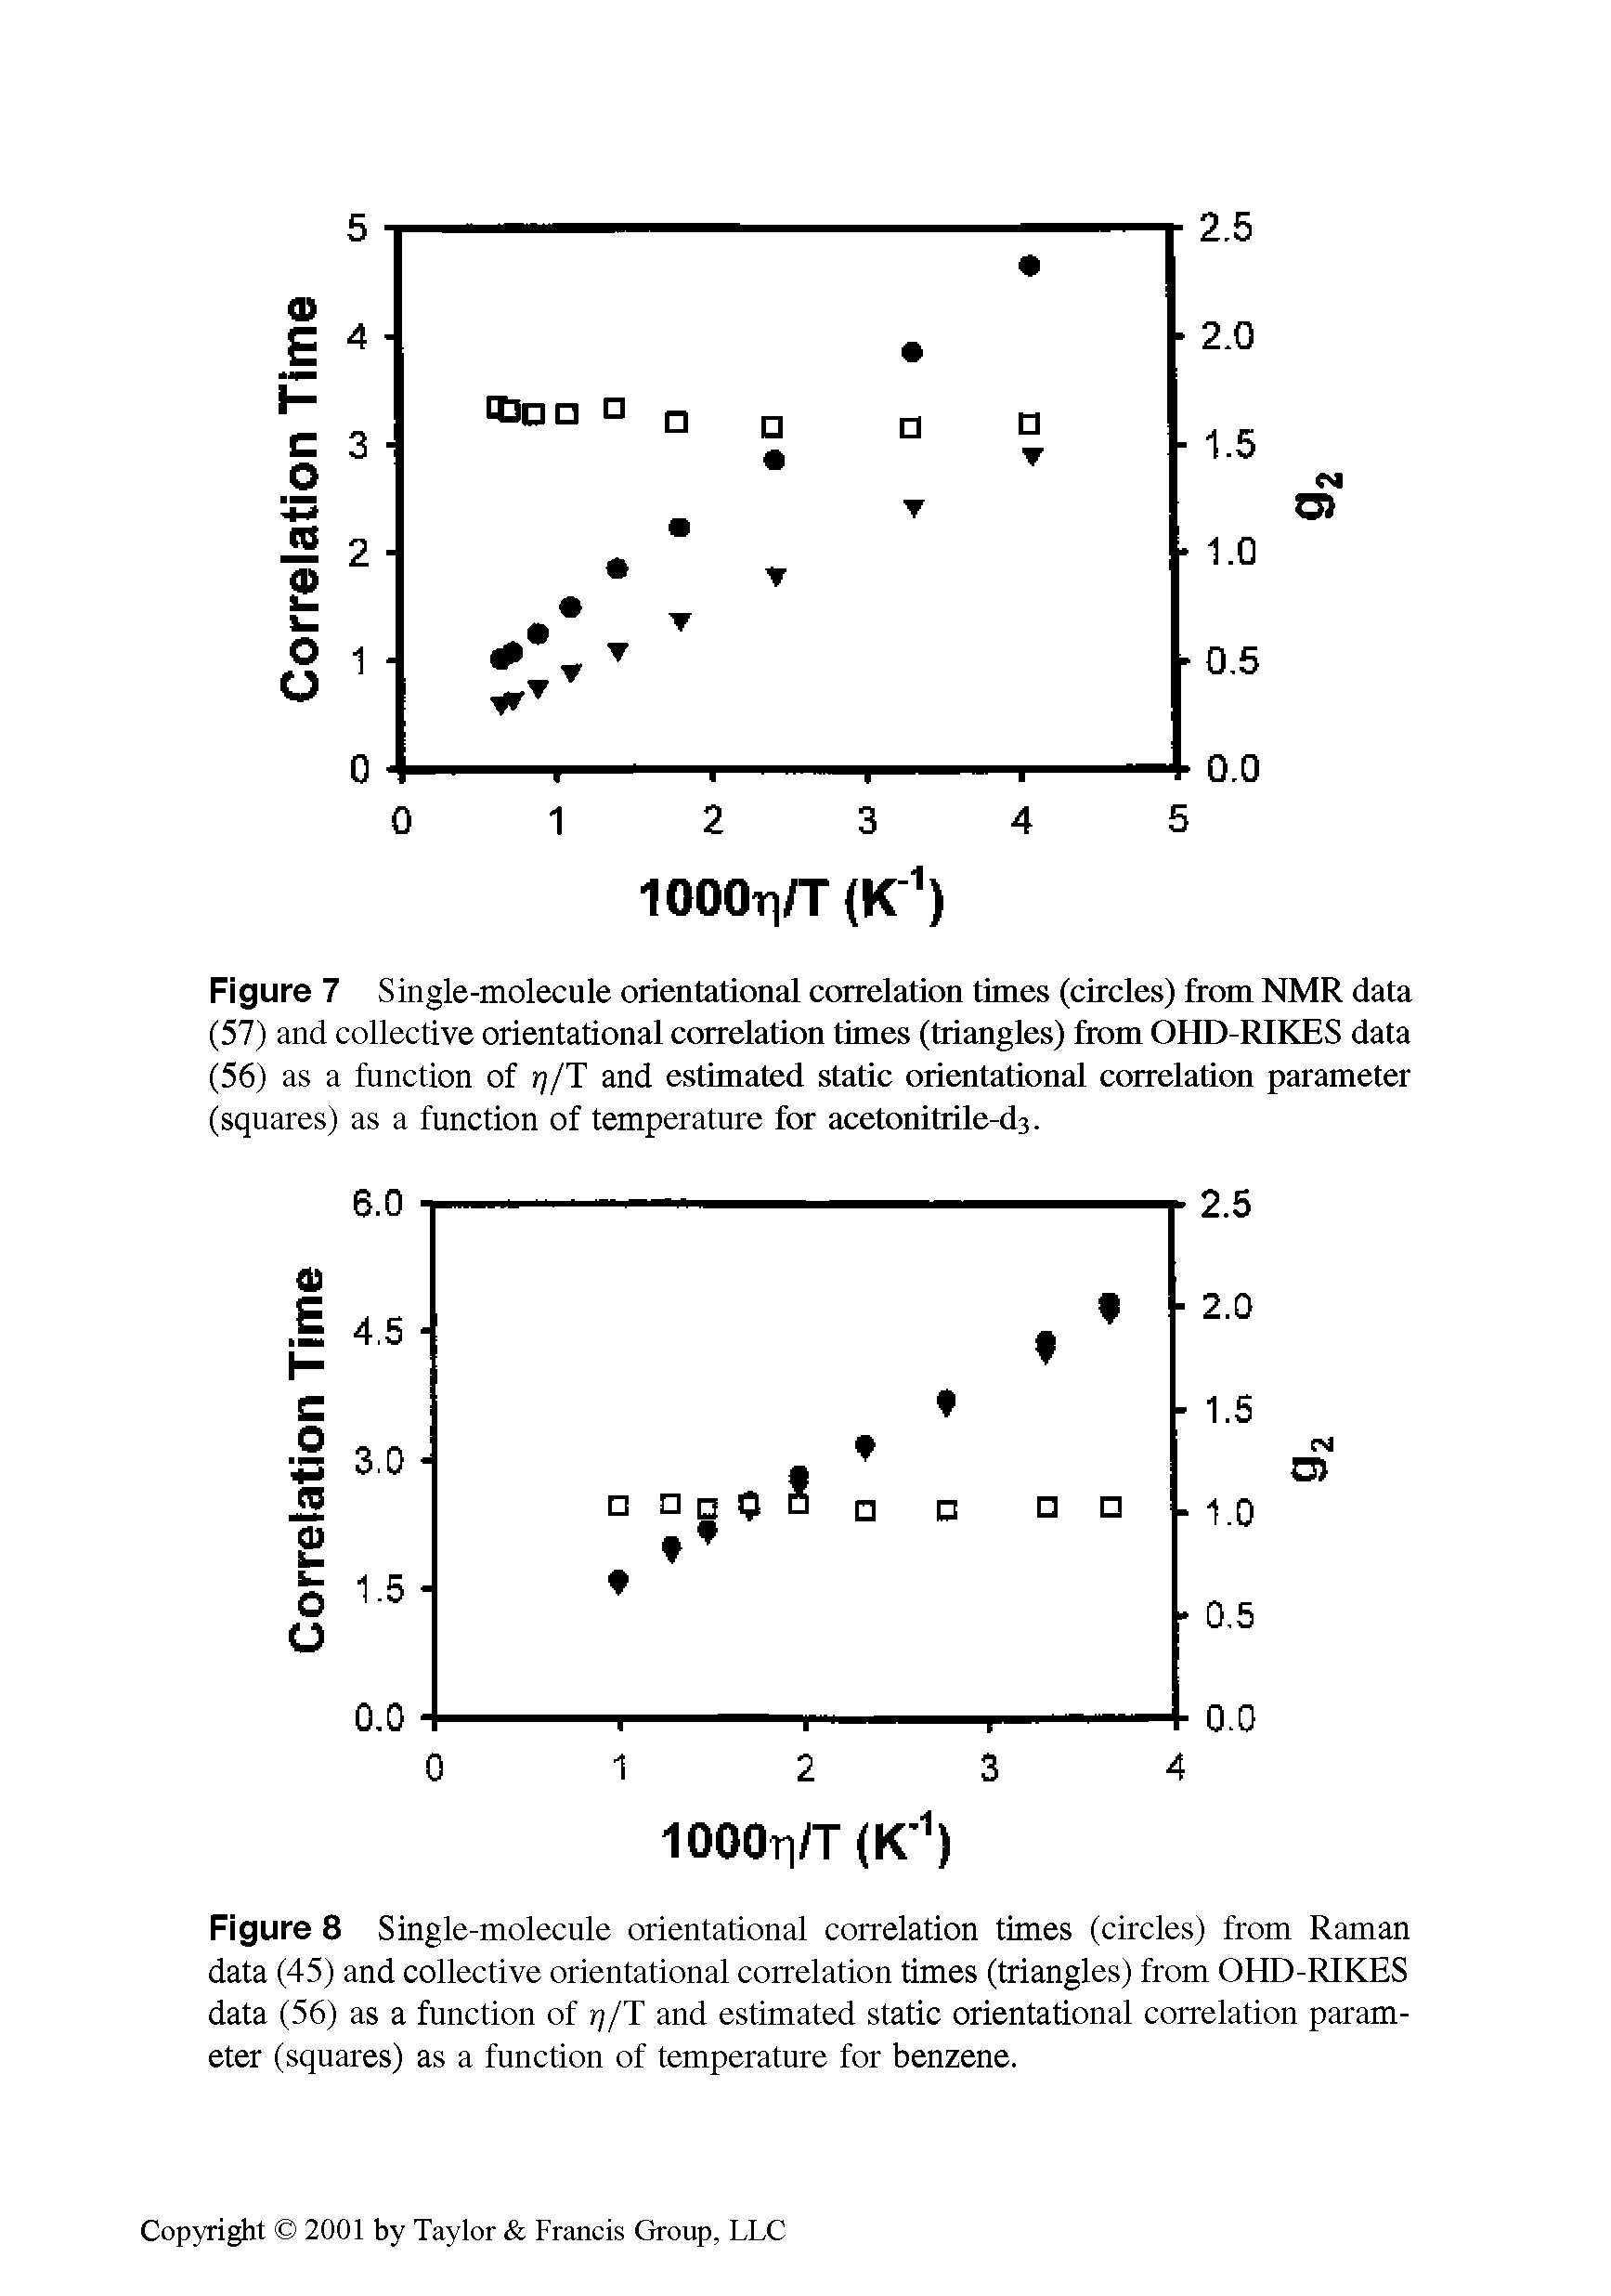 Figure 7 Single-molecule orientational correlation times (circles) from NMR data (57) and collective orientational correlation times (triangles) from OHD-RIKES data (56) as a function of rj/T and estimated static orientational correlation parameter (squares) as a function of temperature for acetonitrile-d3.